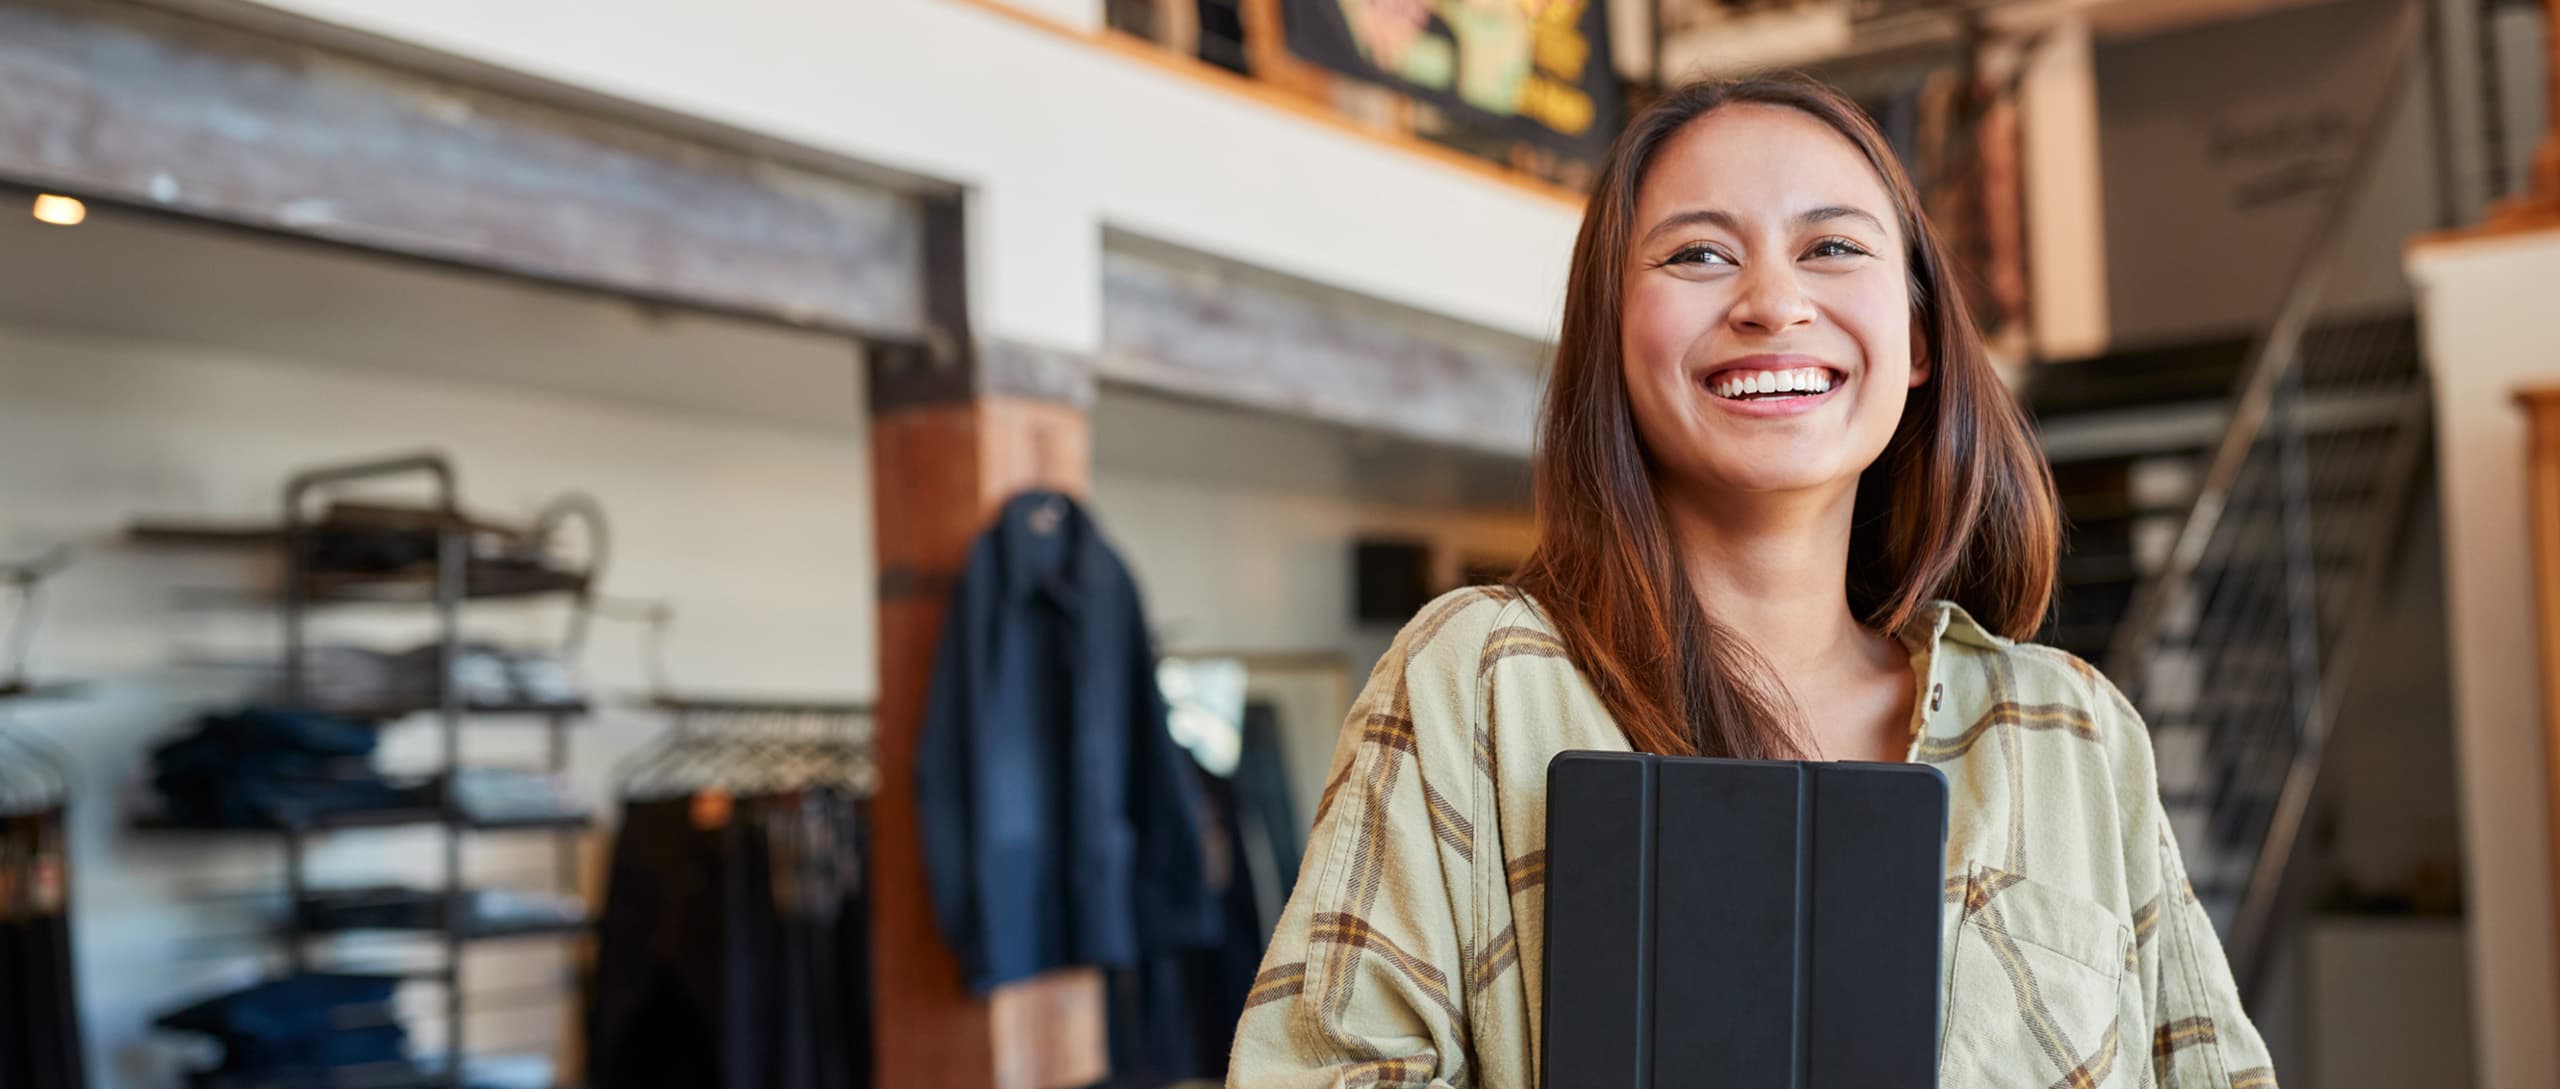 woman smiling and holding an ipad in a clothing store